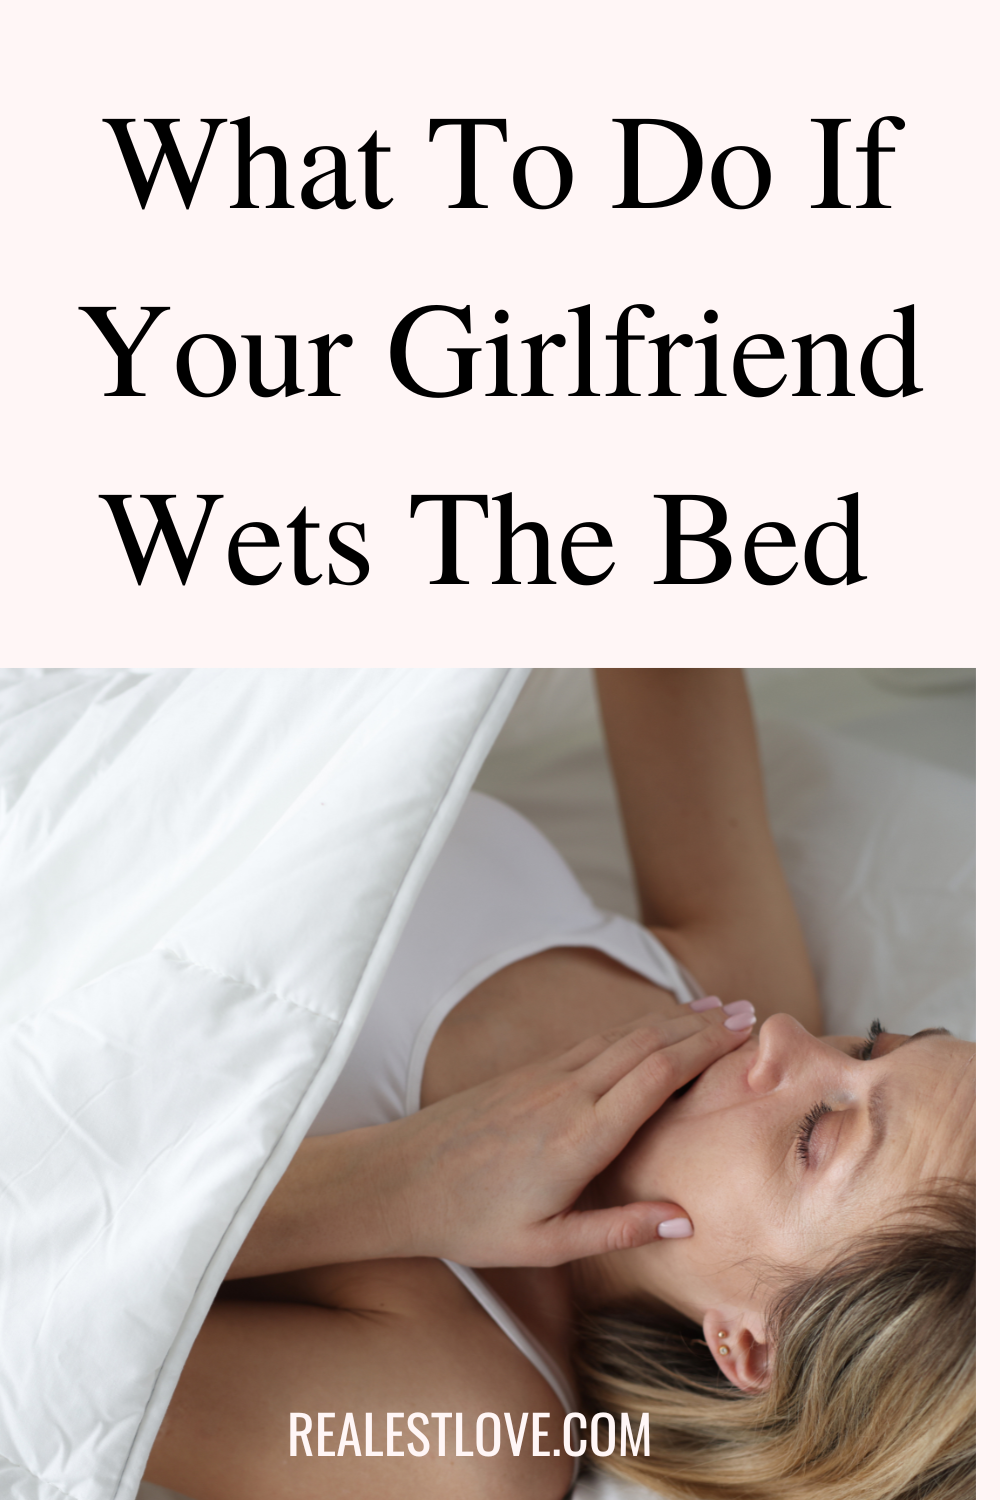 Your Girlfriend Wets The Bed